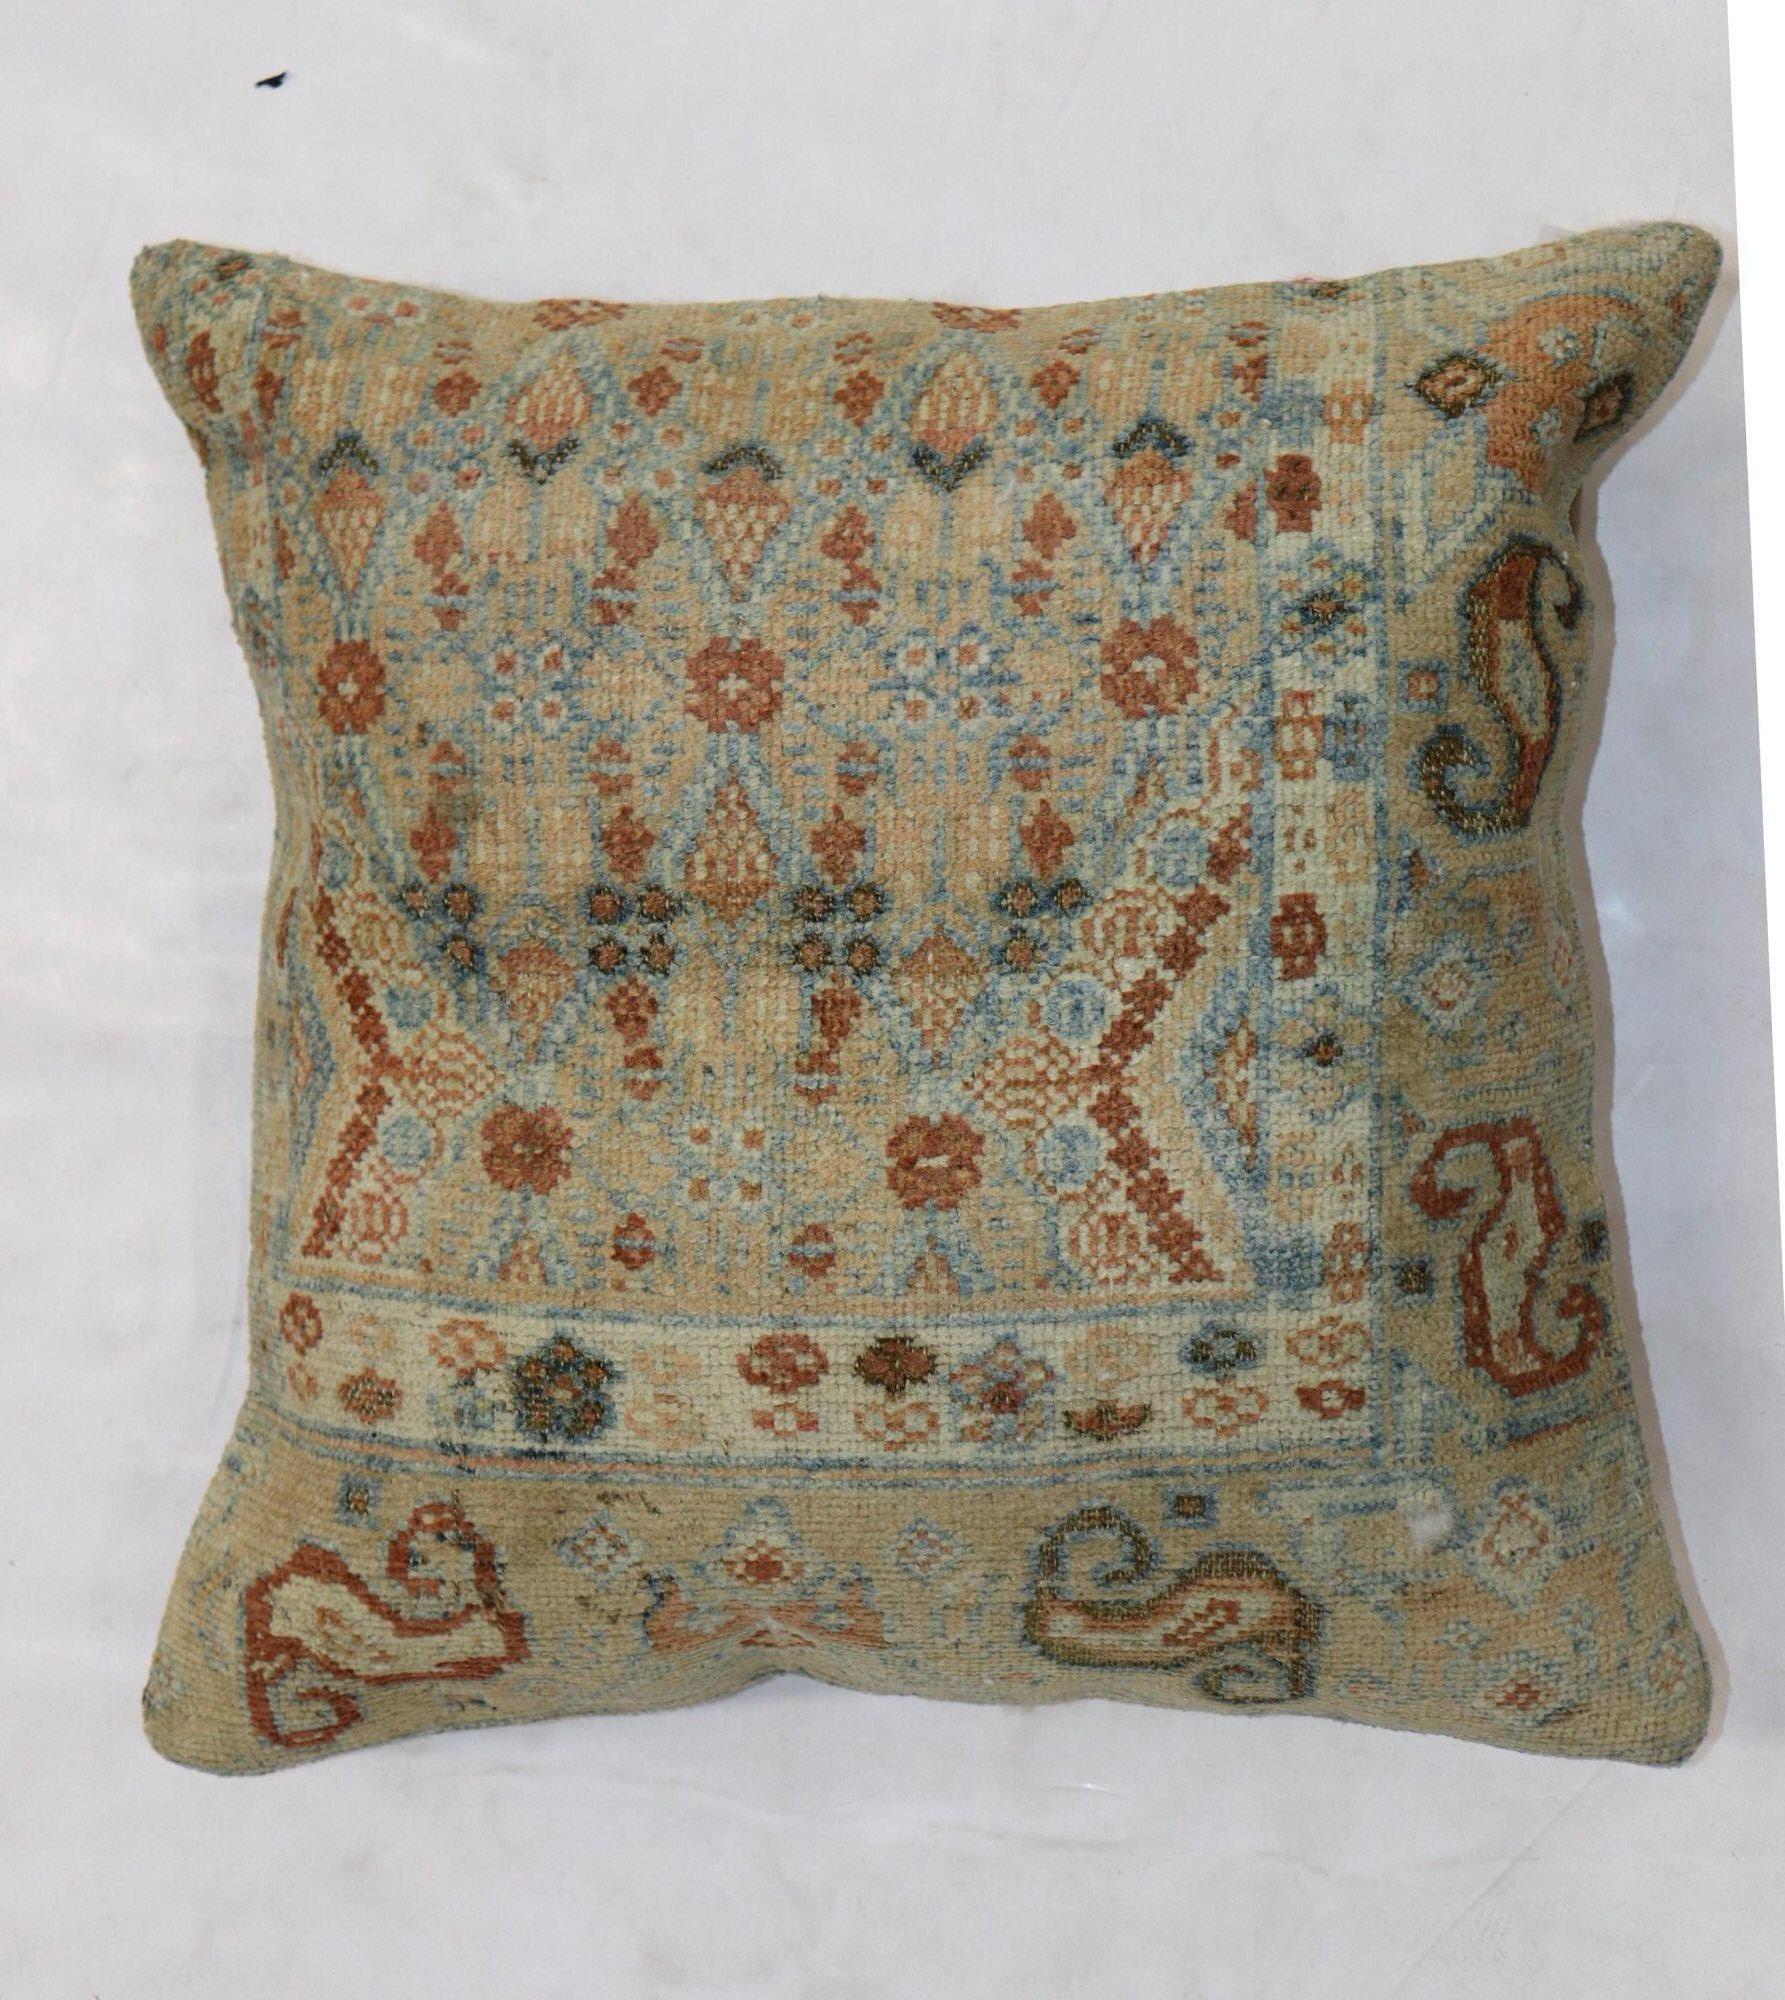 Large Square size pillow made from an early 20th-century Persian Serab rug. Zipper close, poly-fill insert provided

Measures: 20” x 20”.